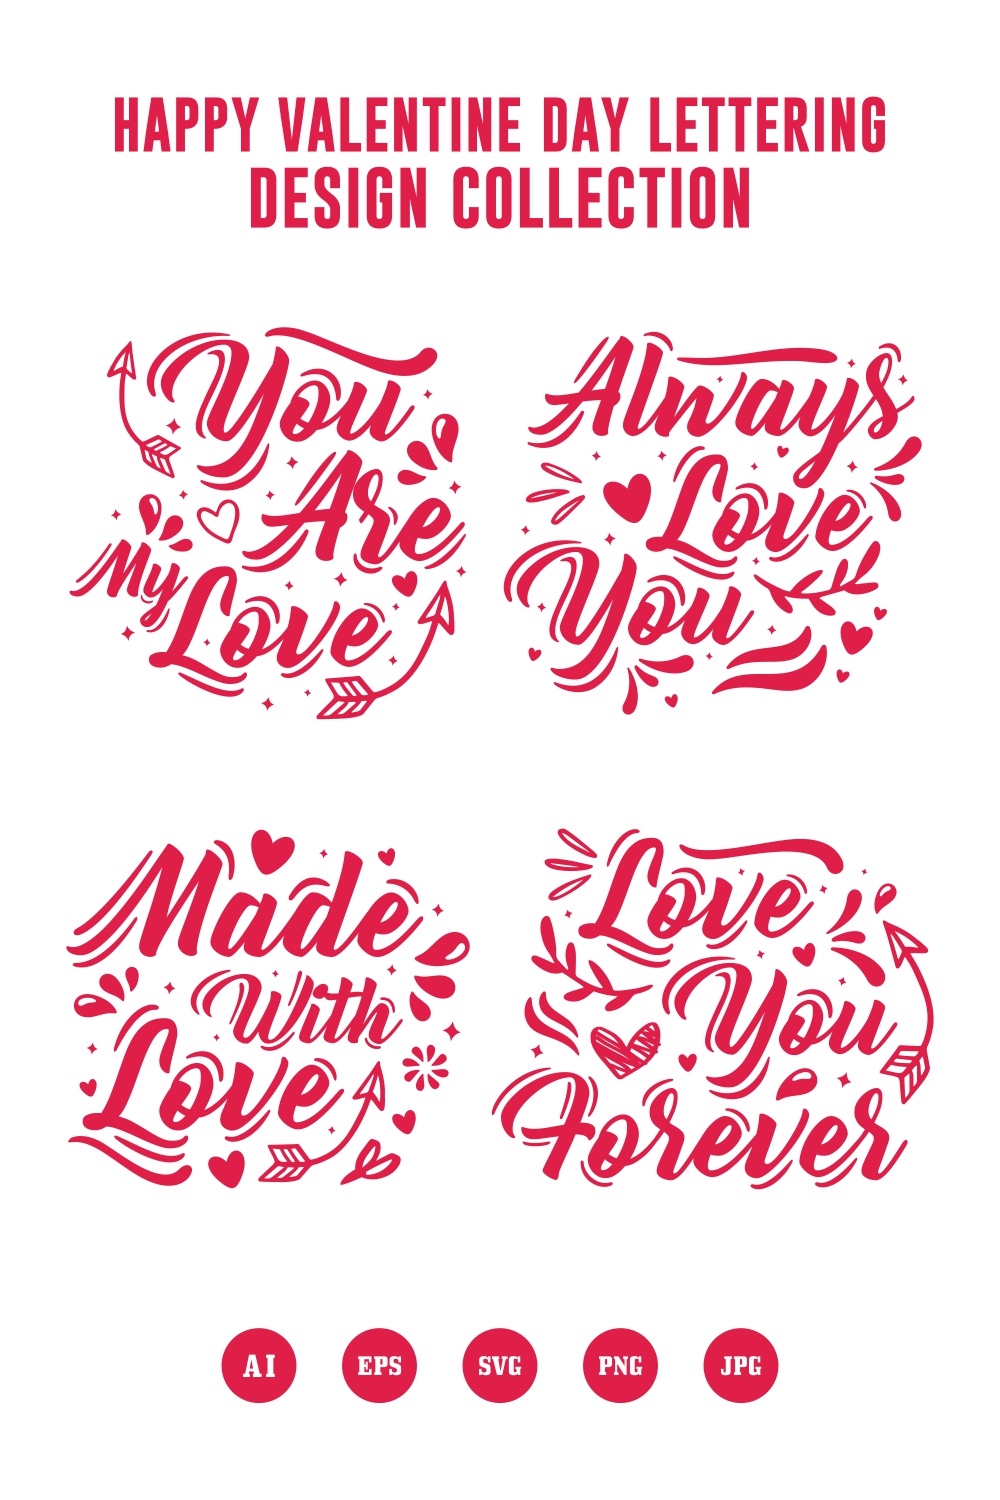 Set Happy valentine day letteing design collection - $4 pinterest preview image.